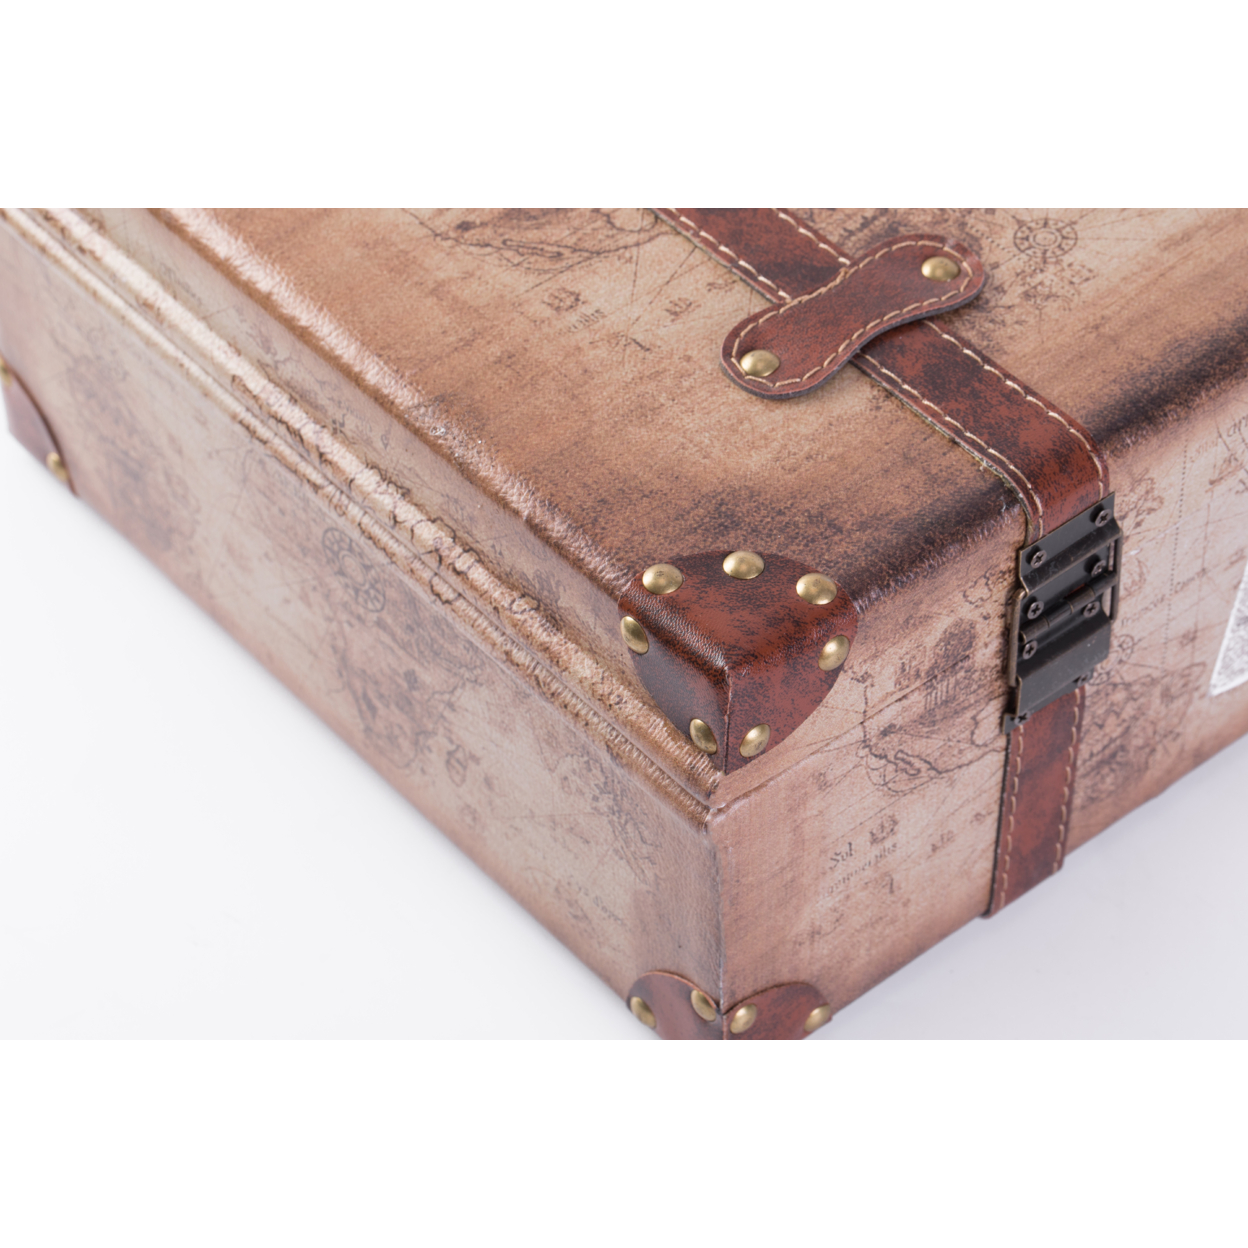 Set of 2 Vintage-Style World Map Leather Suitcase Trunks with Straps and Handle - image 5 of 6